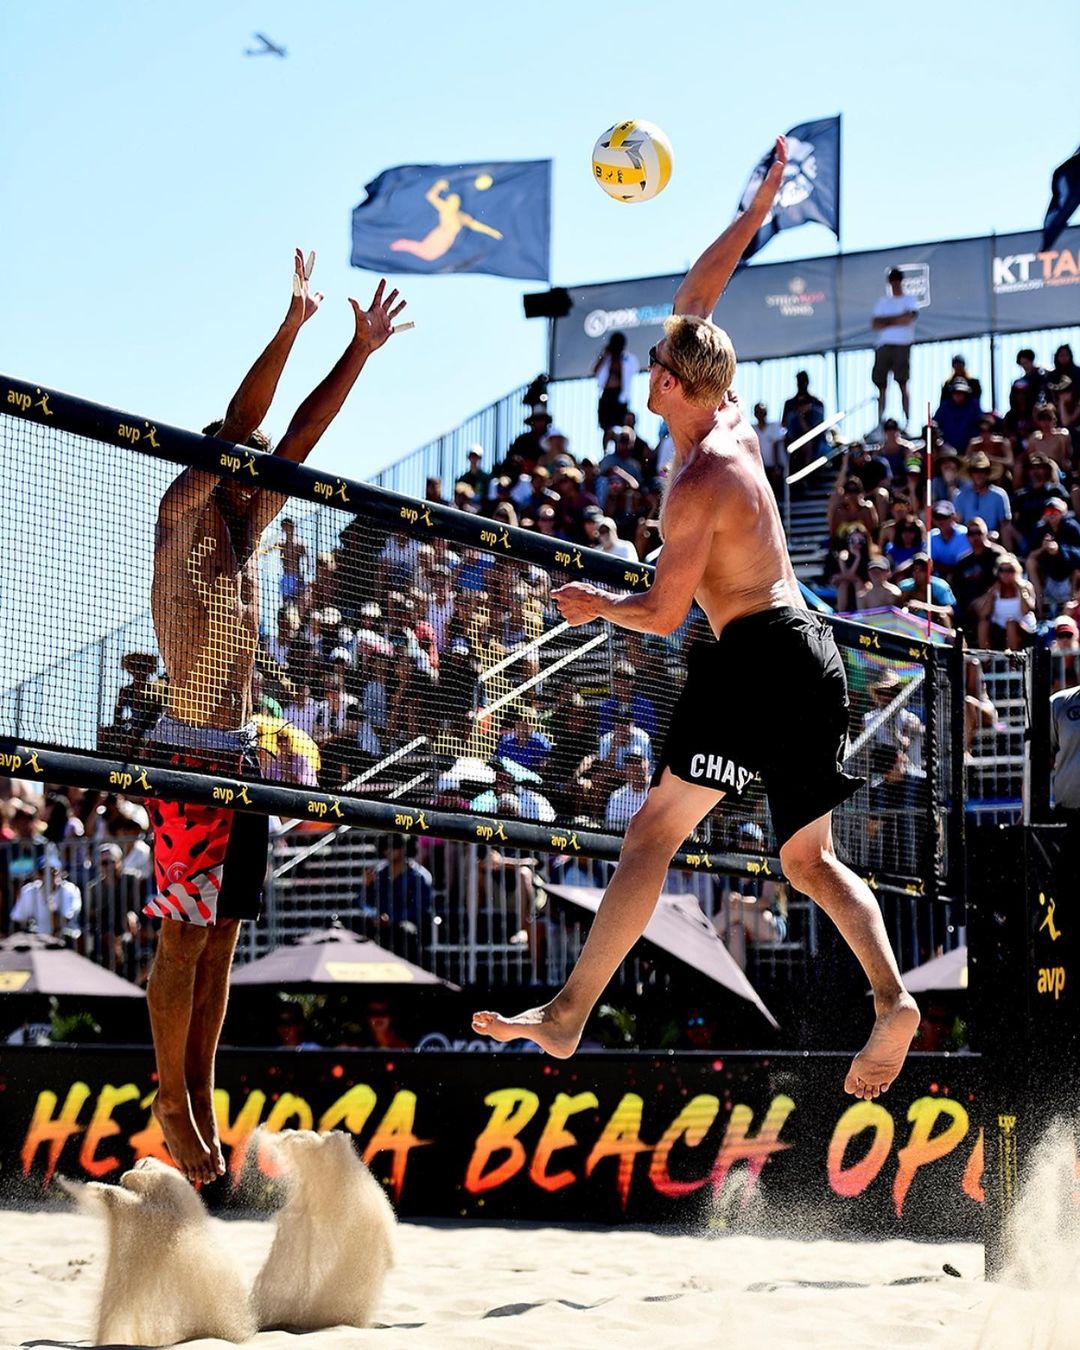 Former NBA player Chase Budinger is now a beach volleyball player